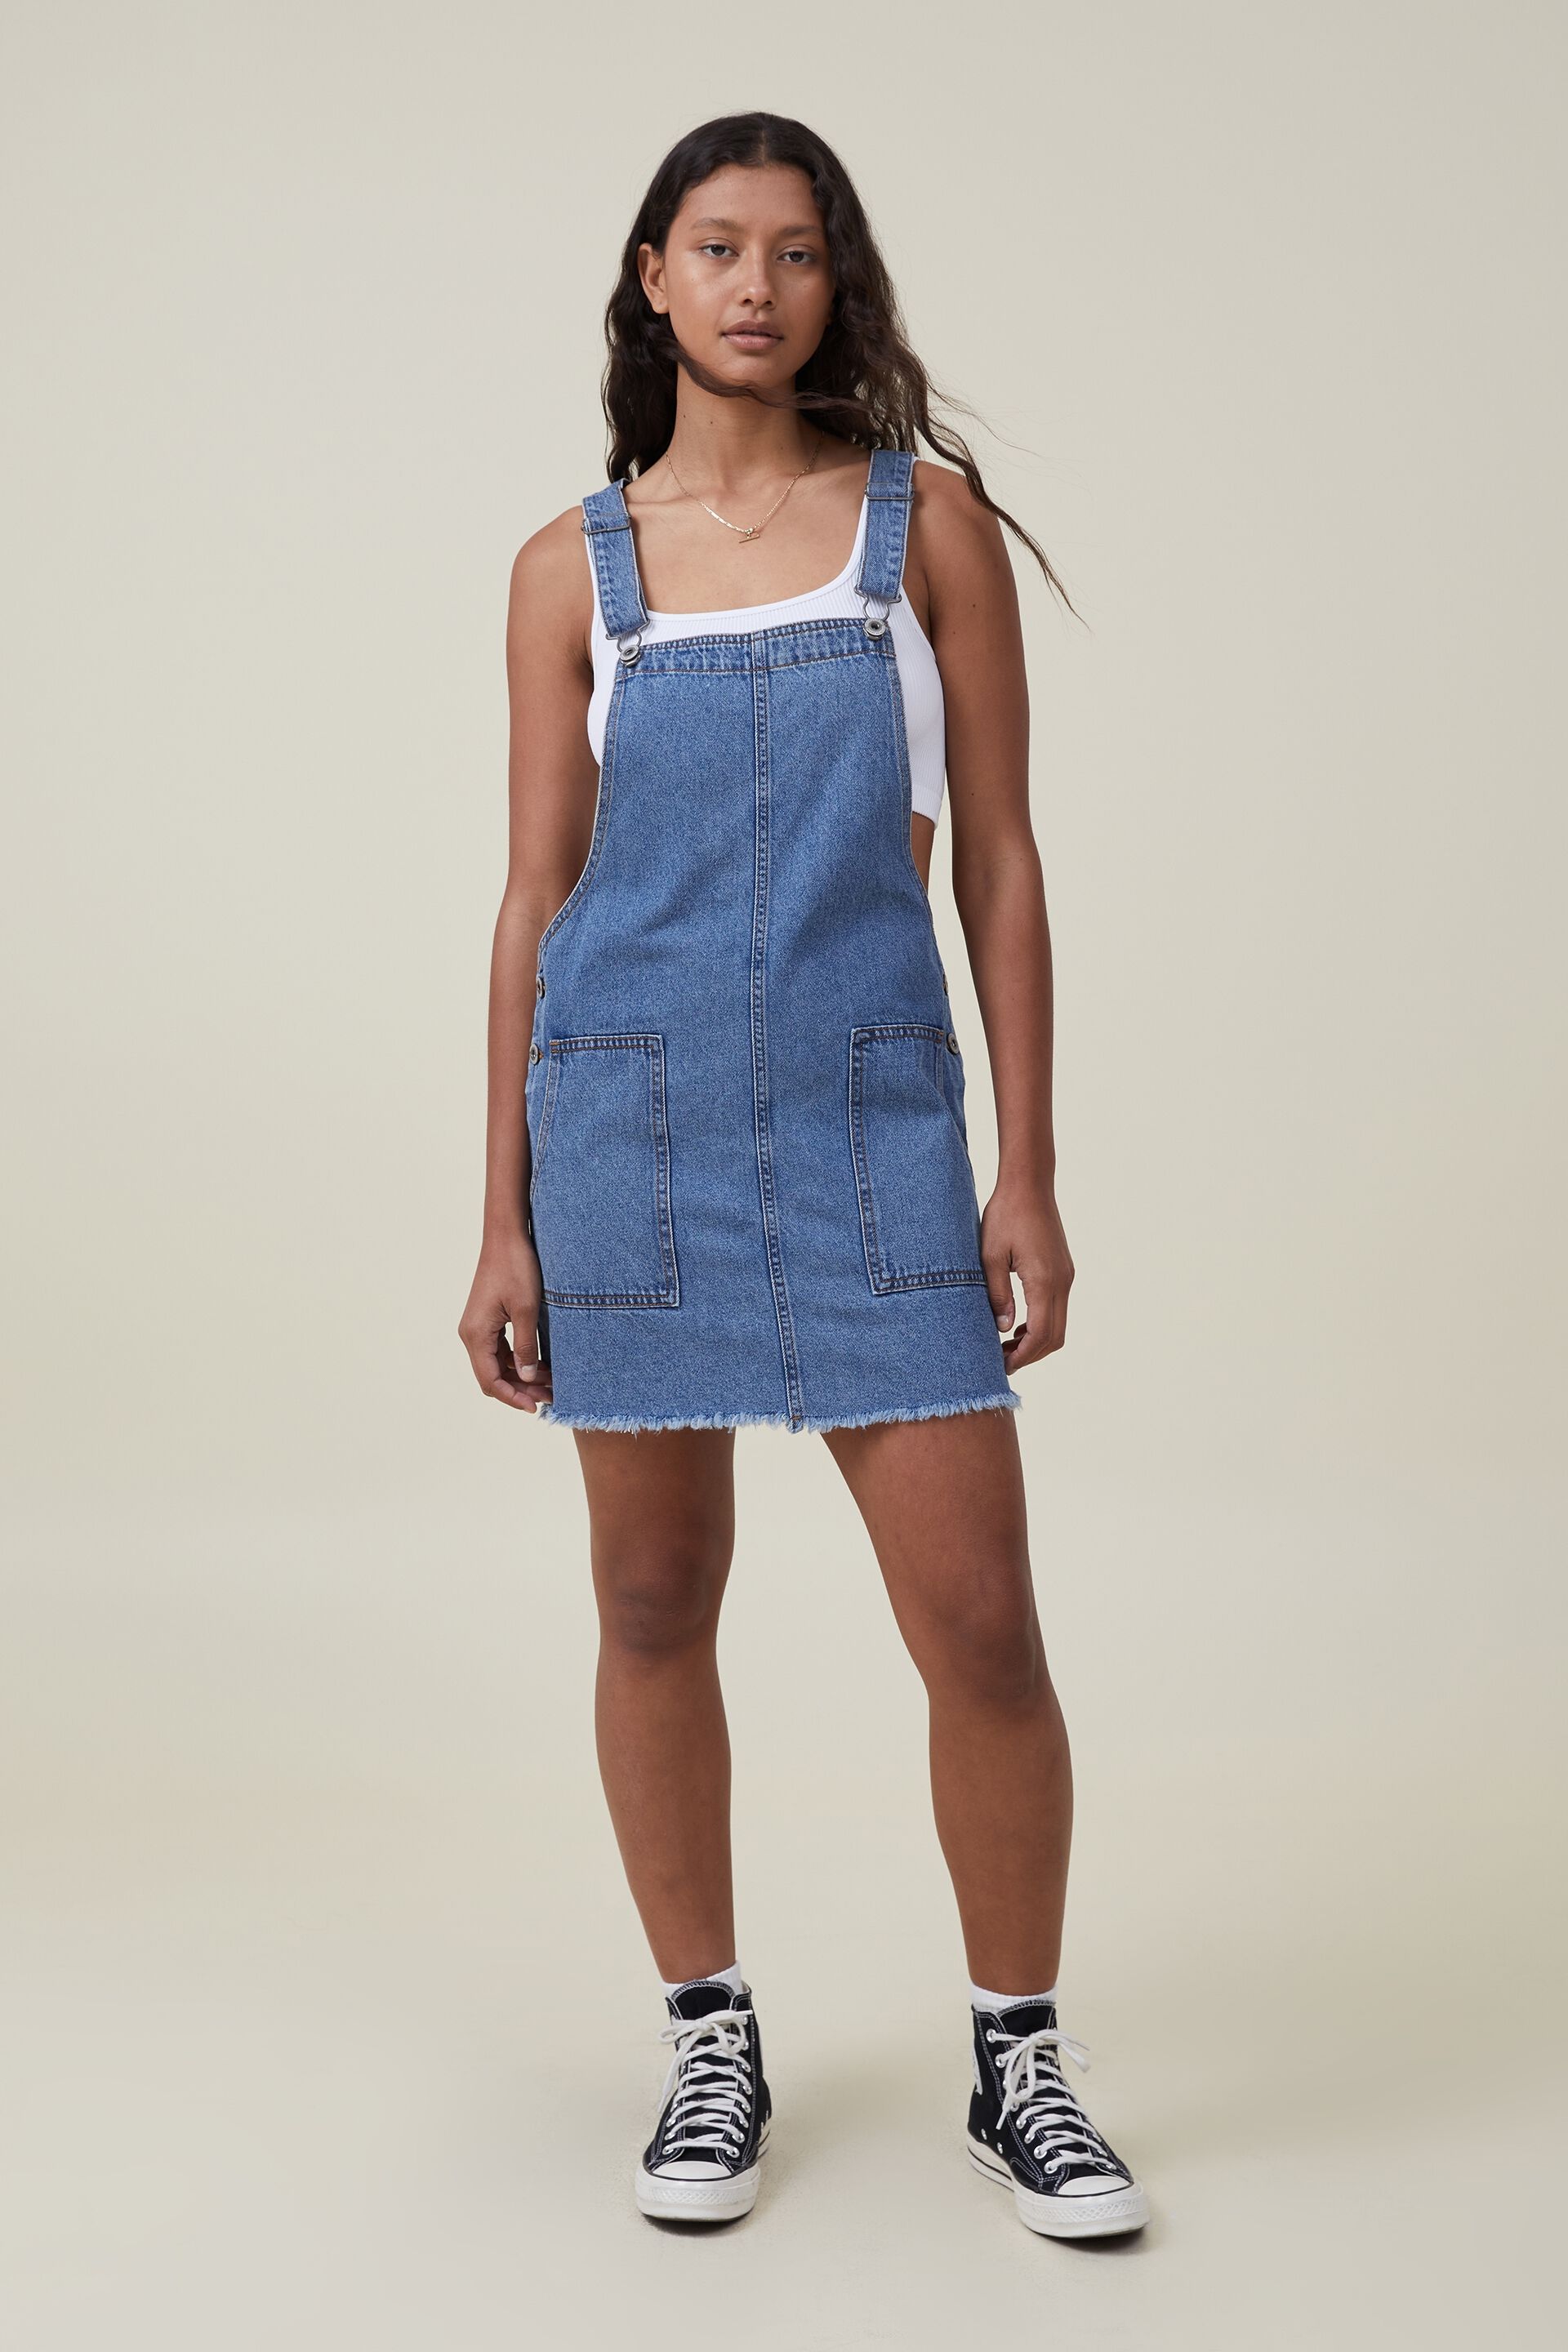 How to Style a Pinafore Dress - Twenties Girl Style | Denim dress outfit, Pinafore  dress outfit, Denim pinafore dress